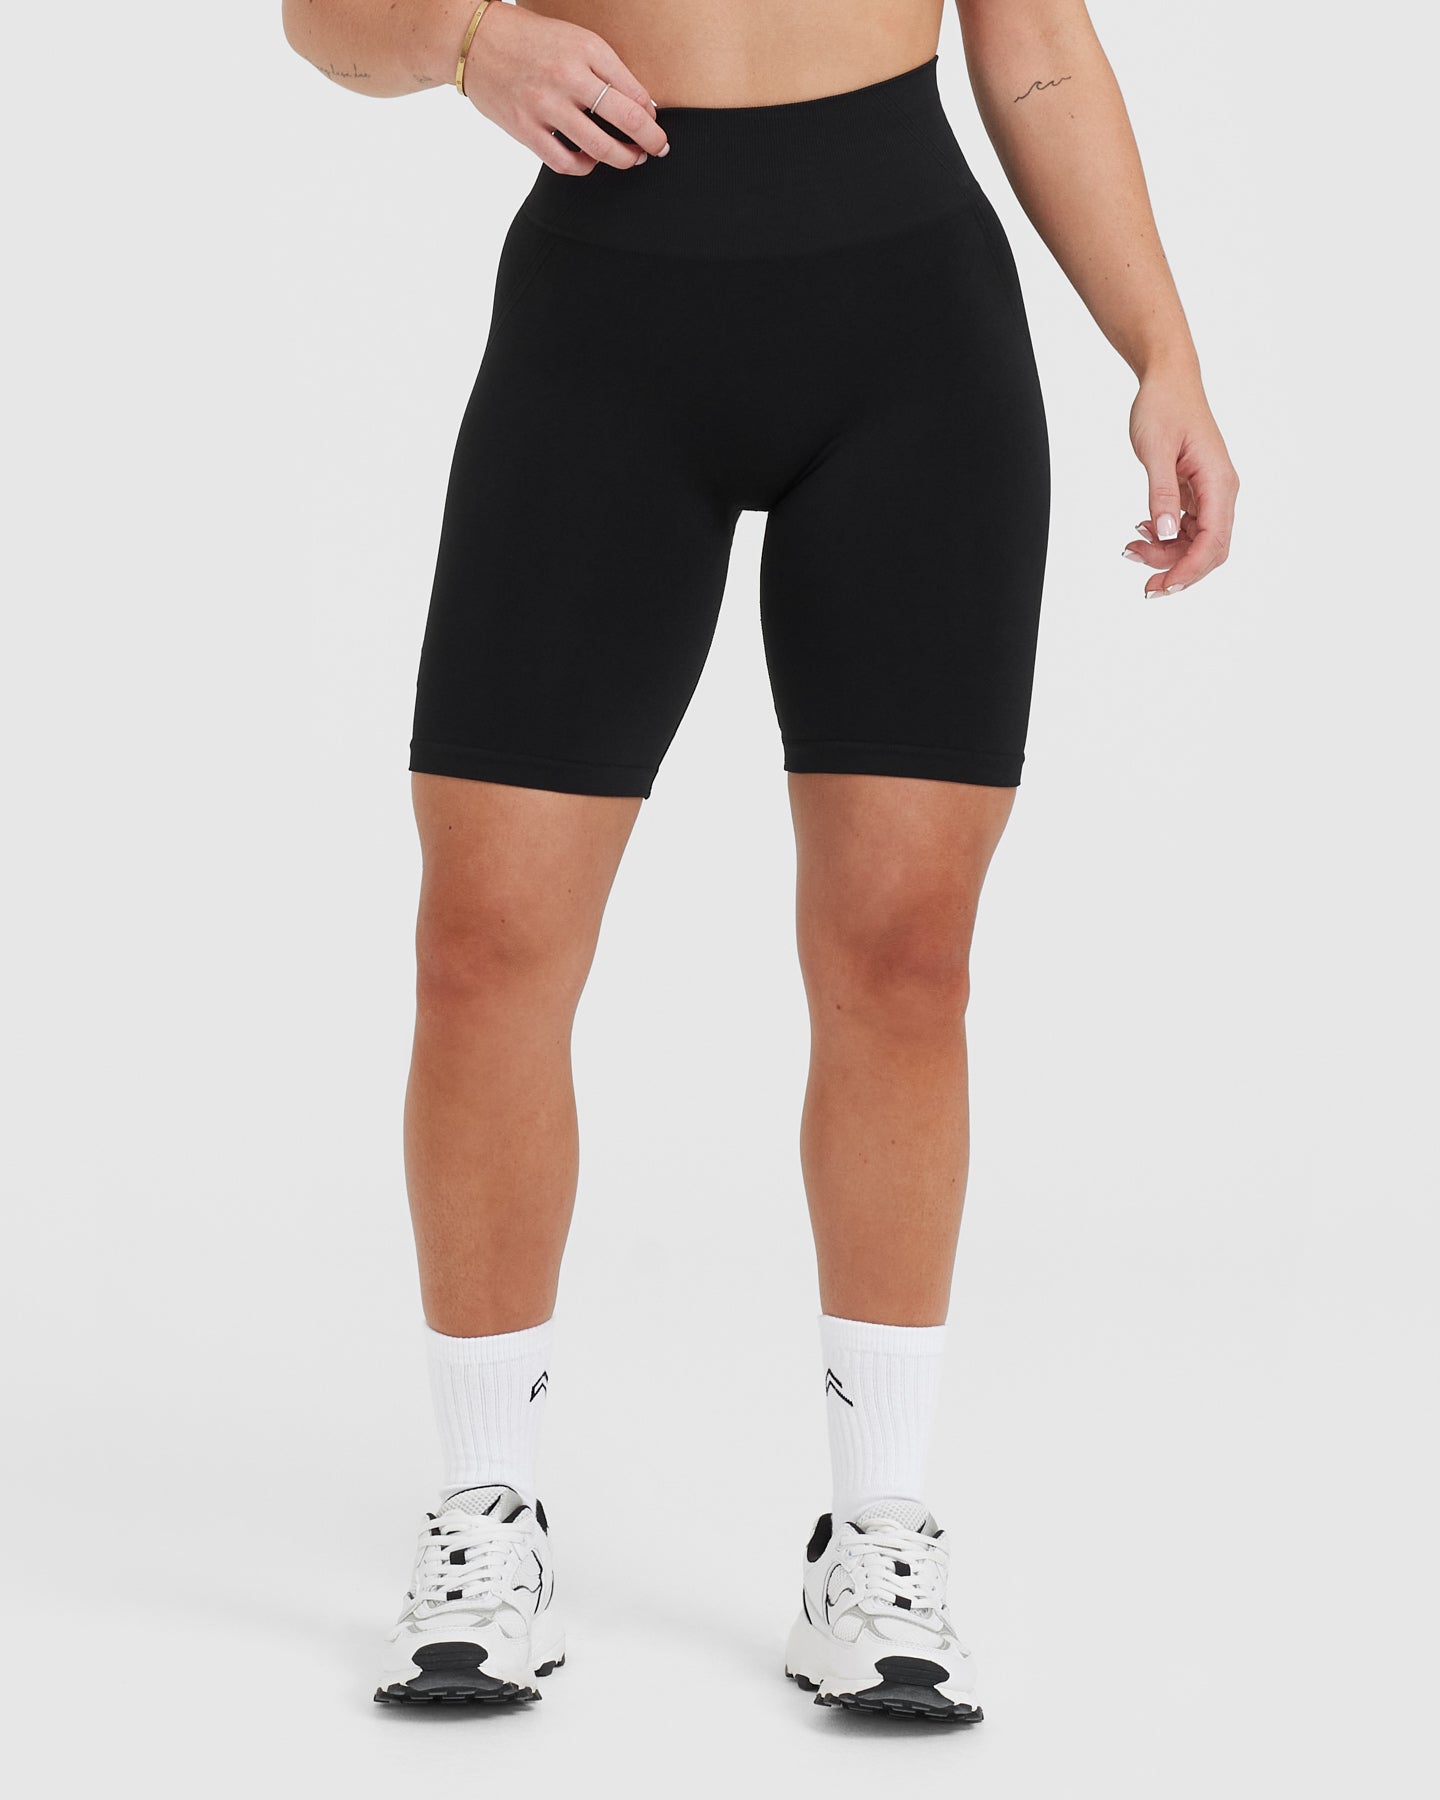 No matter what the sporting activity, our Muscle Crop Tee & High Waist Bike  Shorts have you covered.